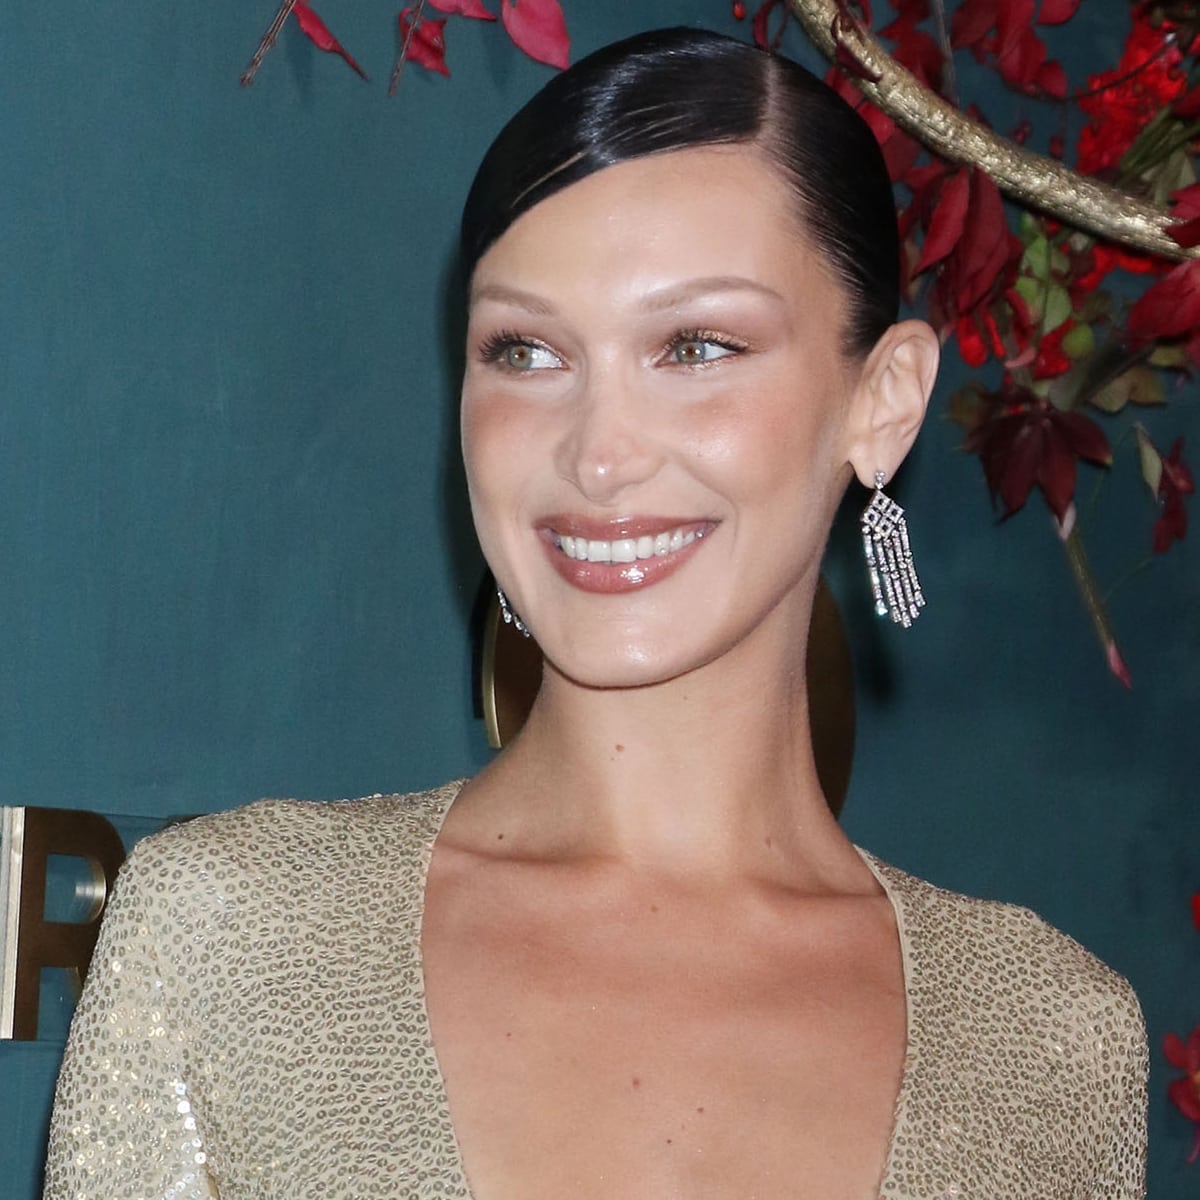 Bella Hadid's Plastic Surgery: Before and After Photos